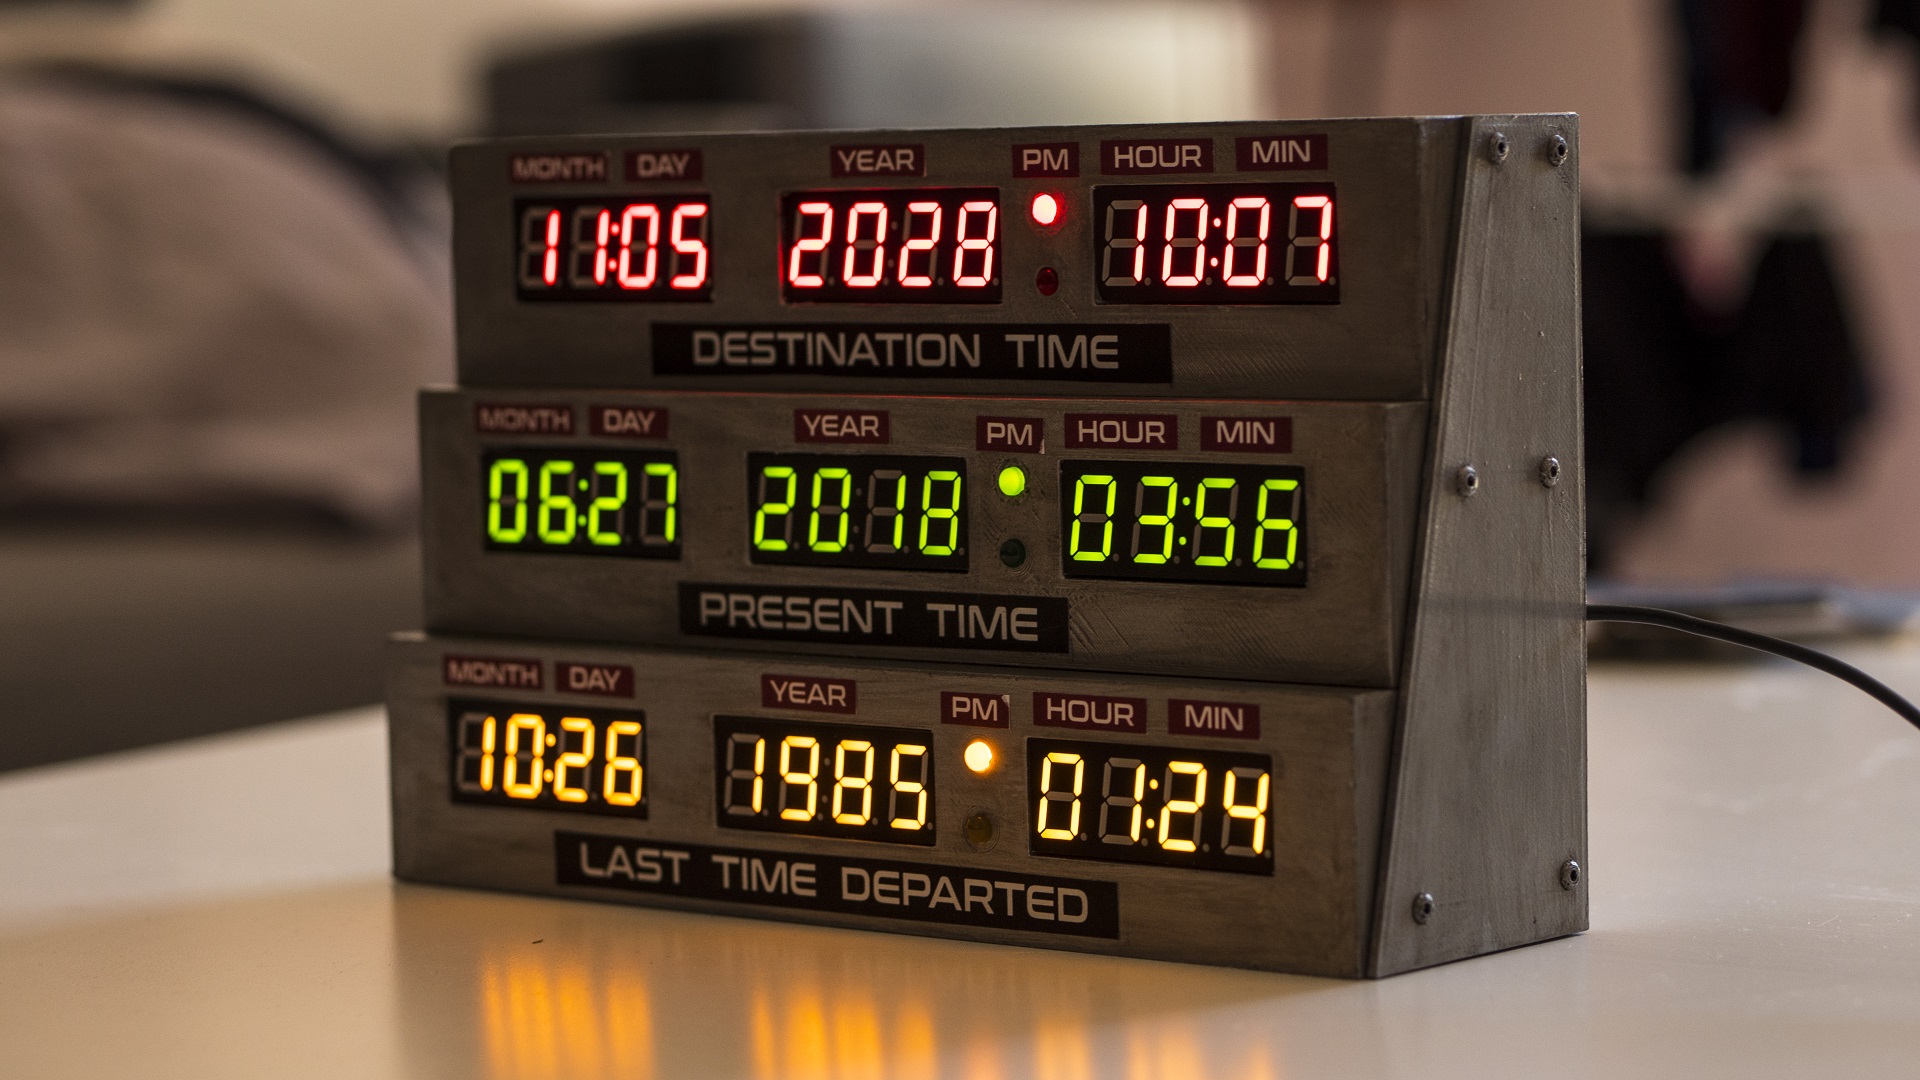 back to the future 3 clock picture